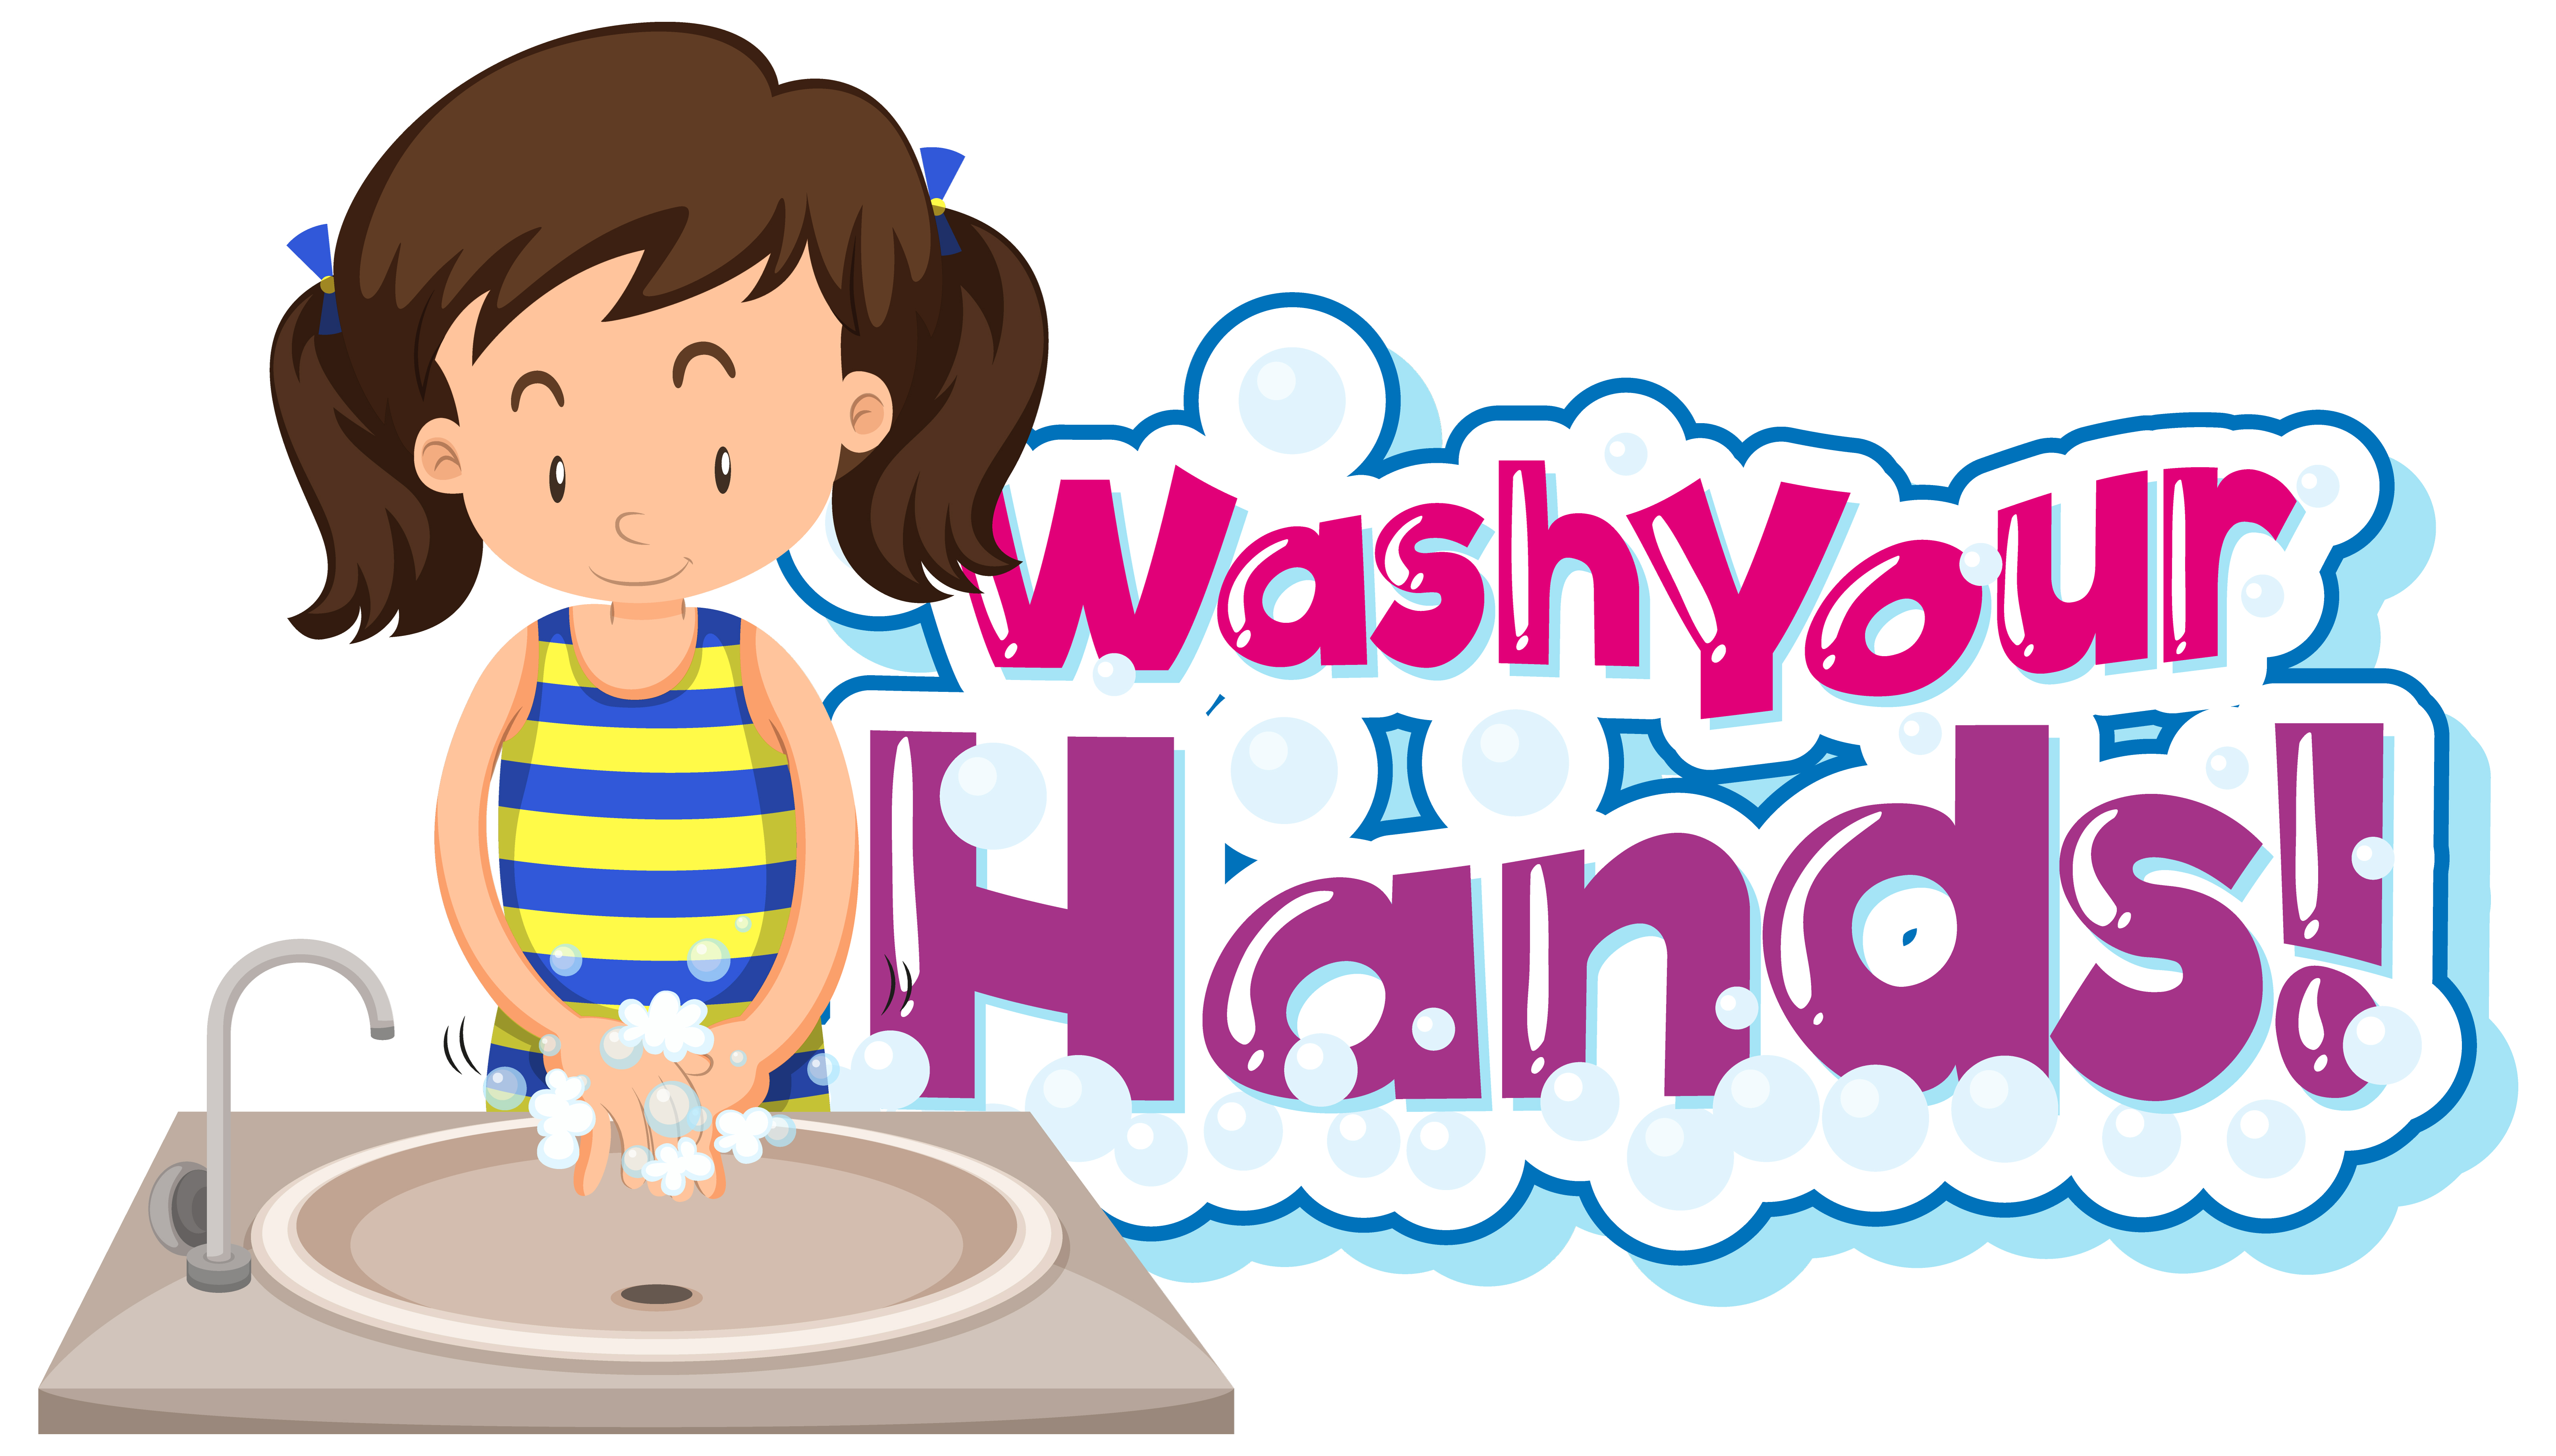 Hand Washing Poster For Kids